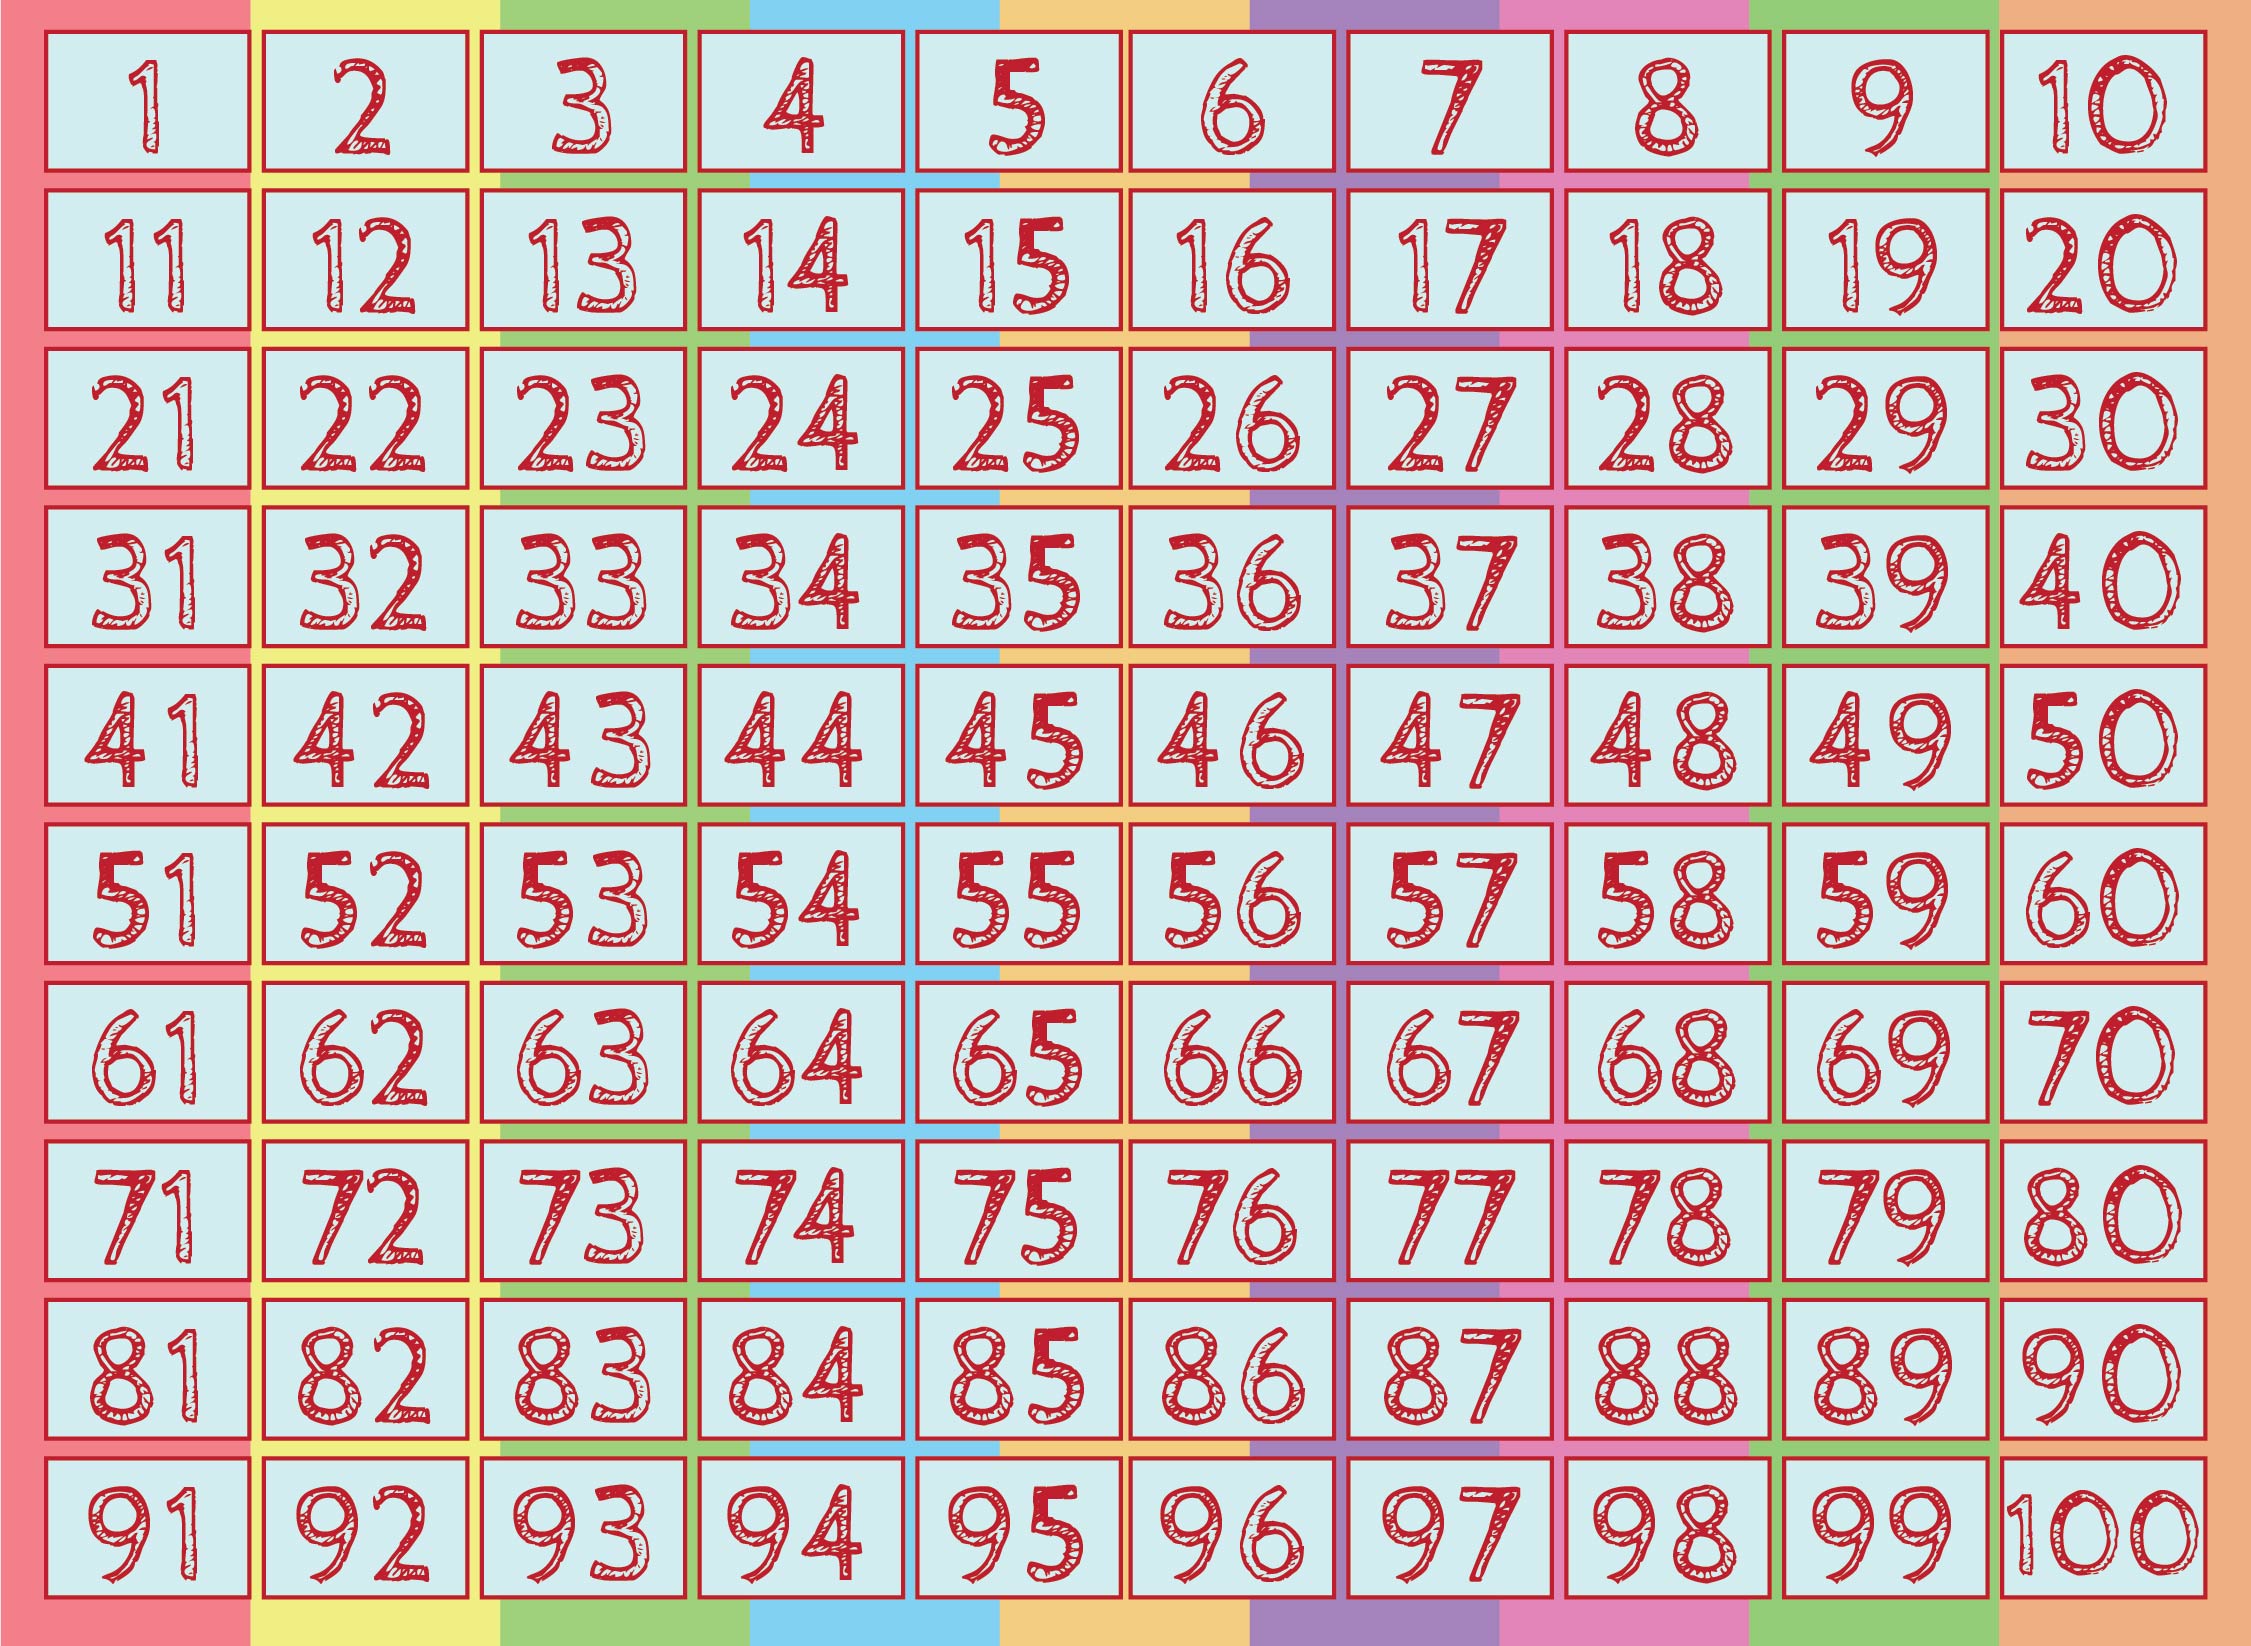 6 times table up to 200